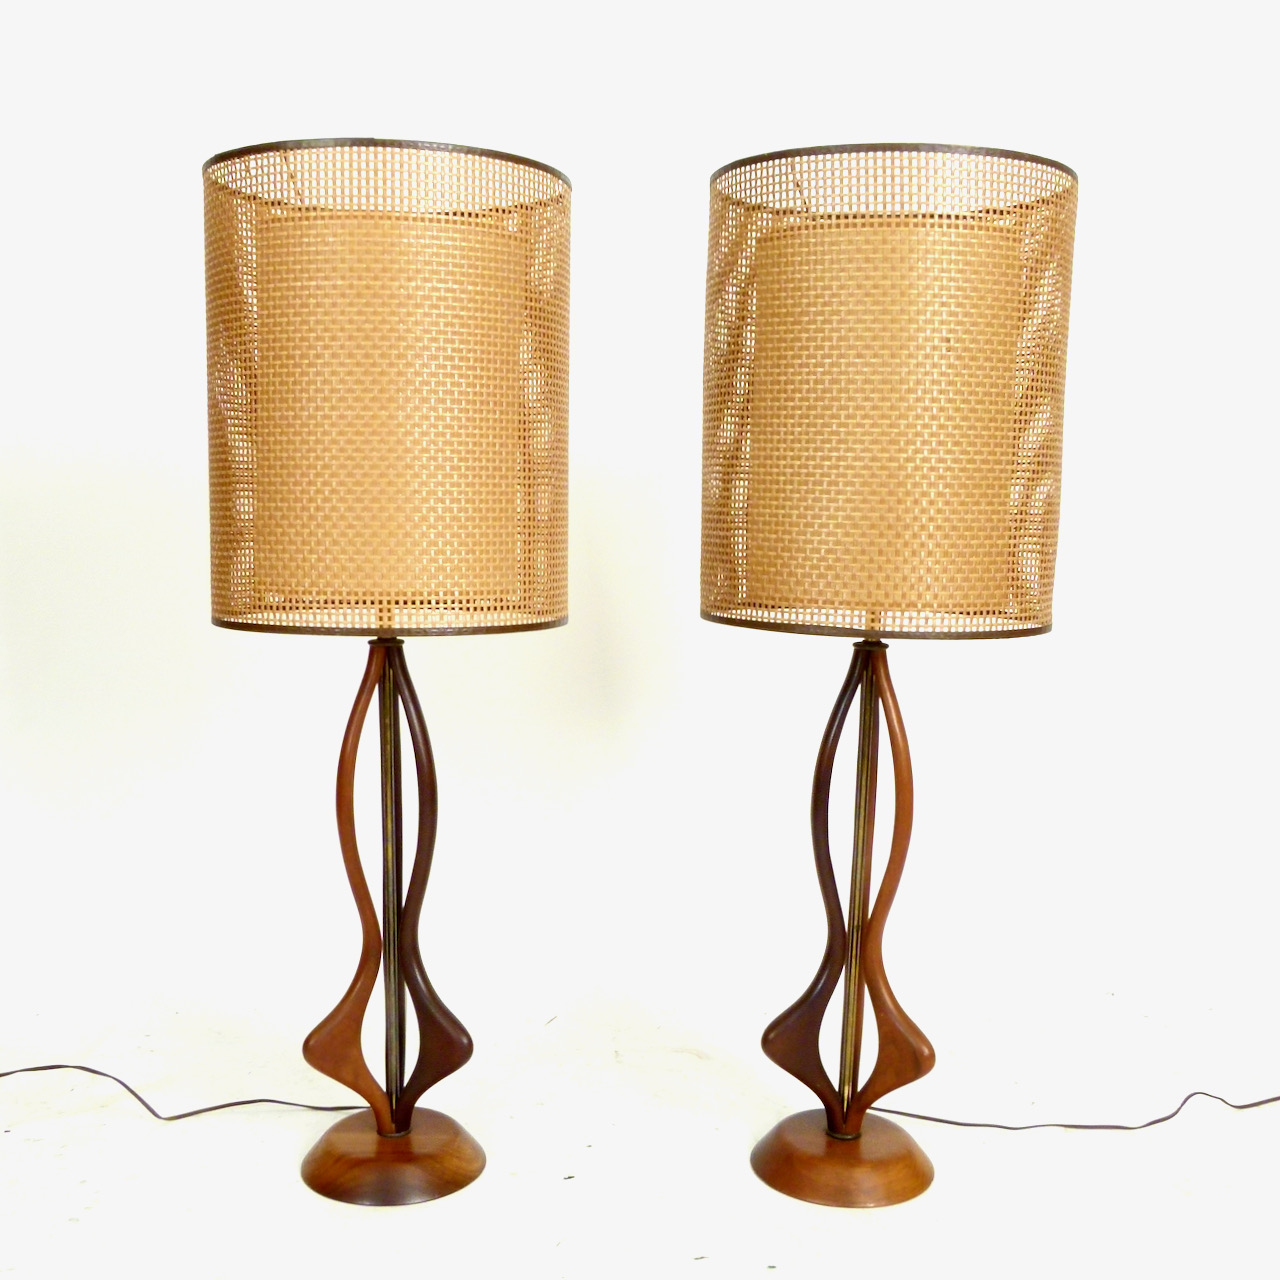 Pair of Sculptural Walnut Lamps by V H Woolums at City Issue Atlanta